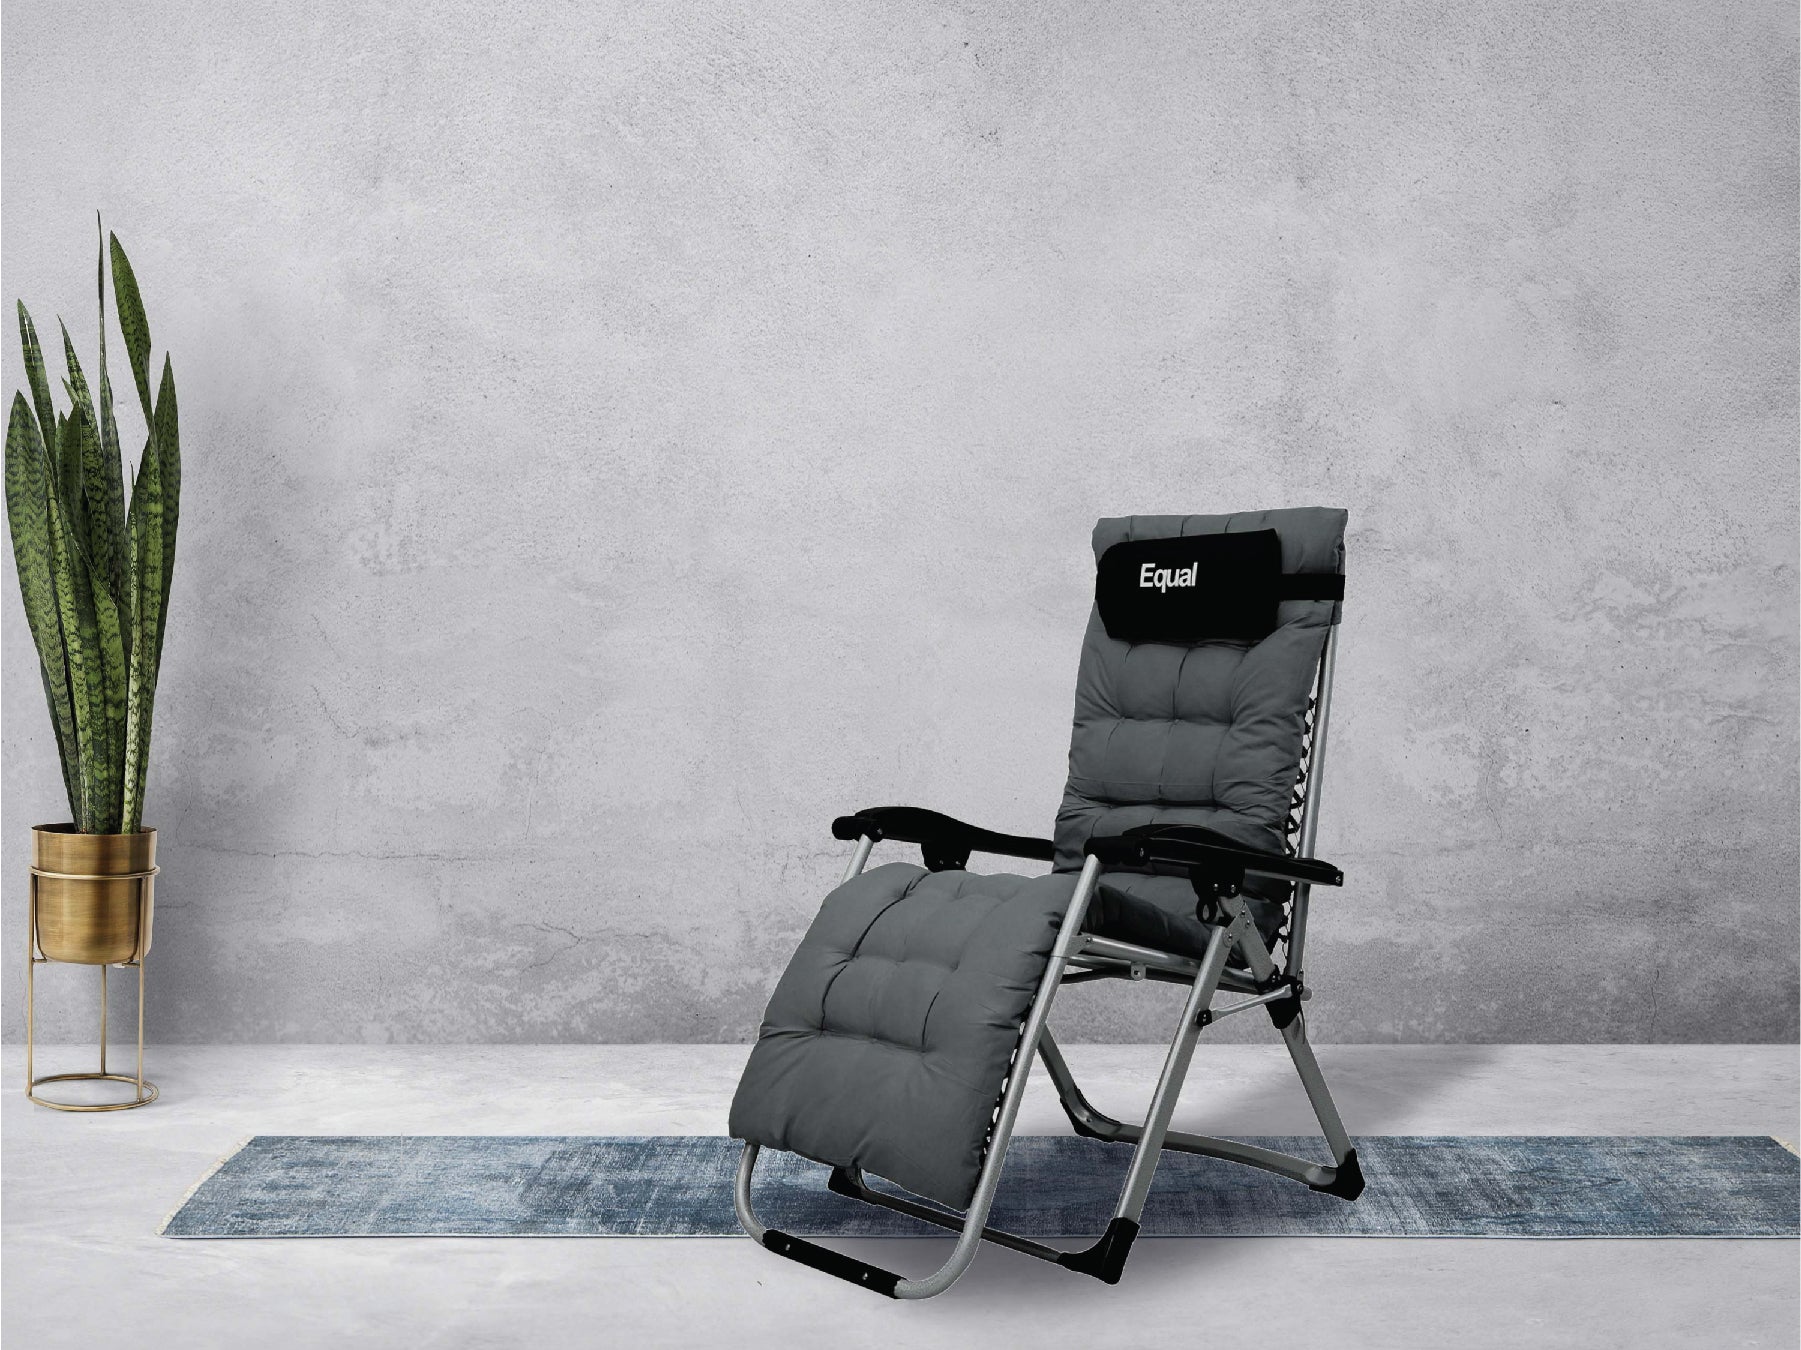 4 Things to Consider before Buying a Recliner Chair